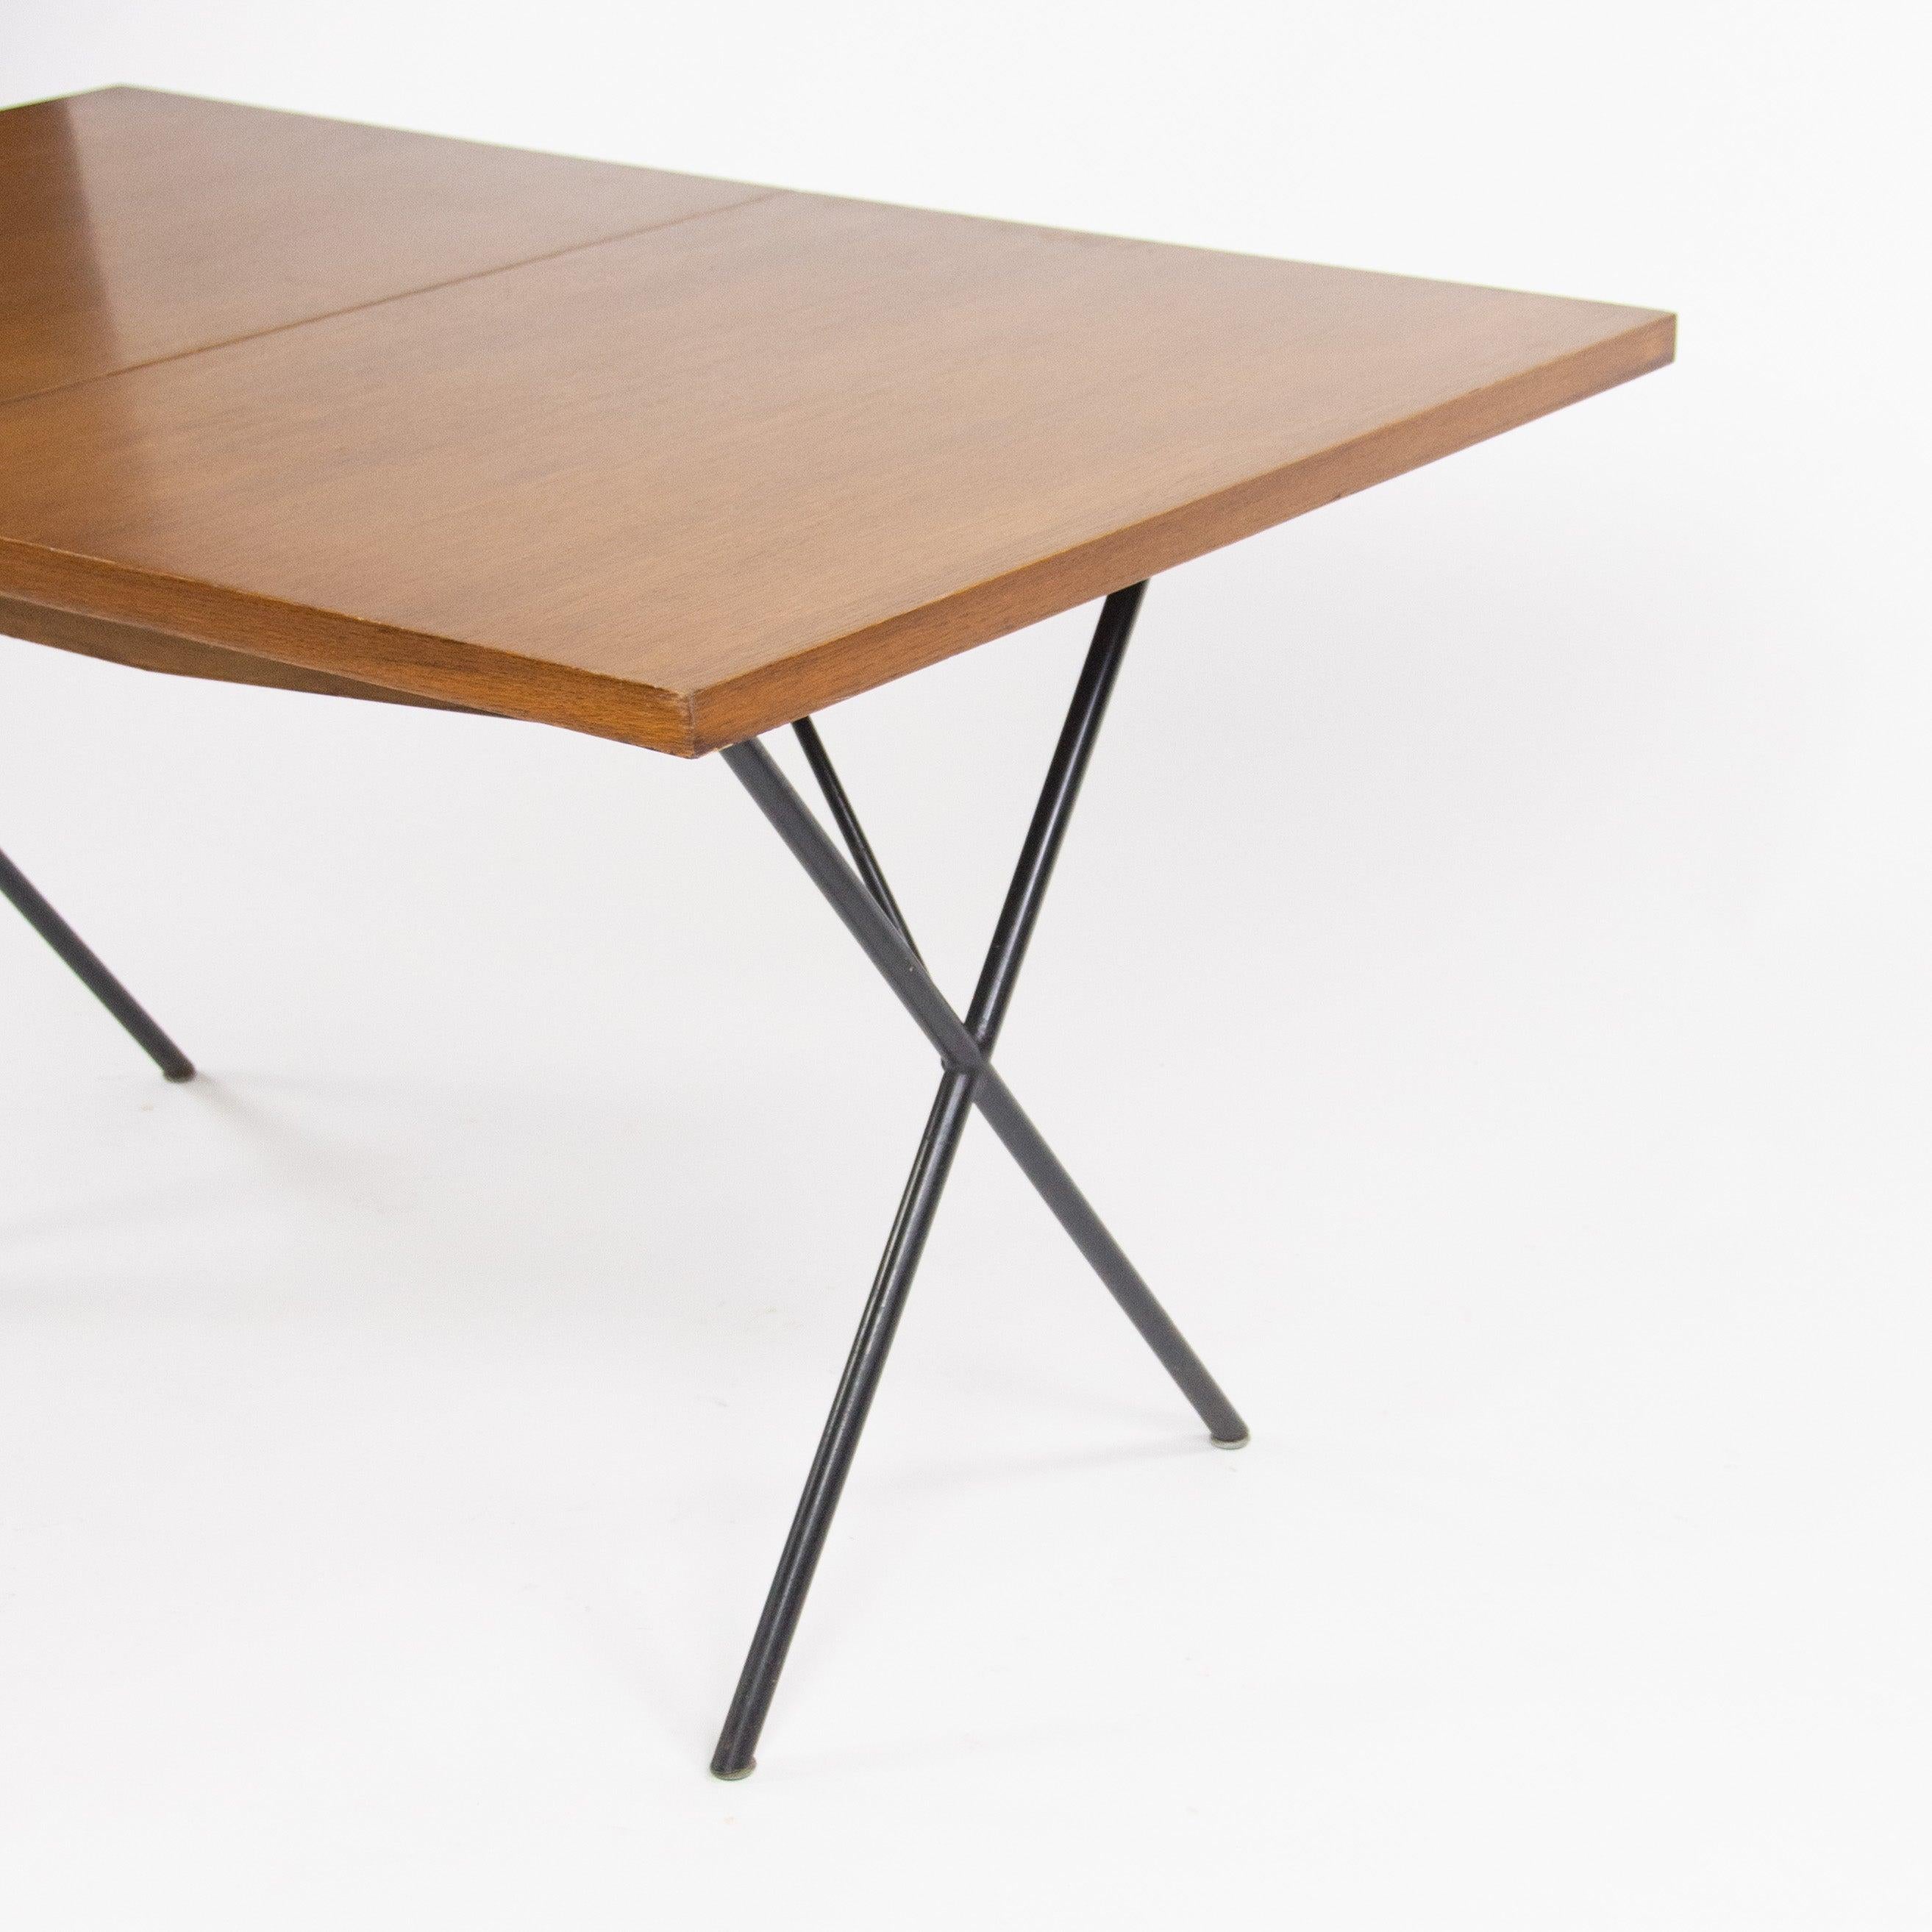 1950's Original George Nelson Herman Miller X Leg Extension Dining Table 5260 In Good Condition For Sale In Philadelphia, PA